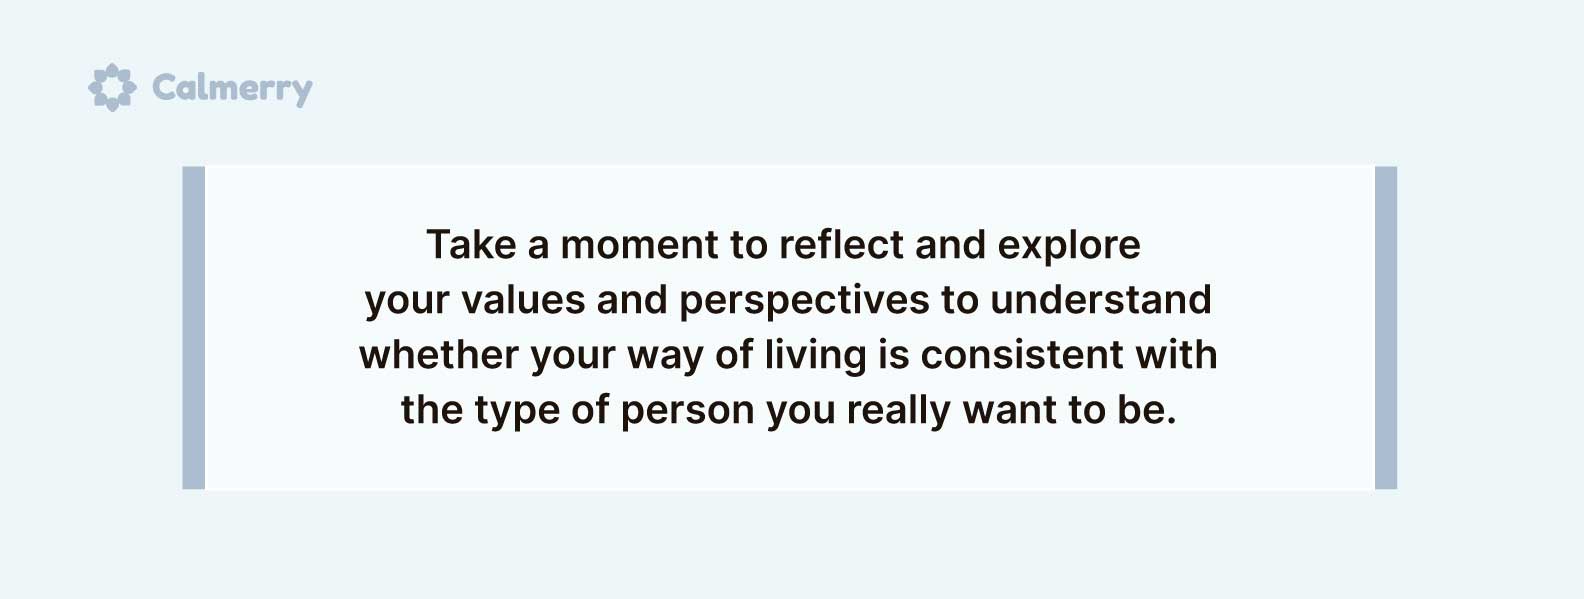 reflect and explore your values